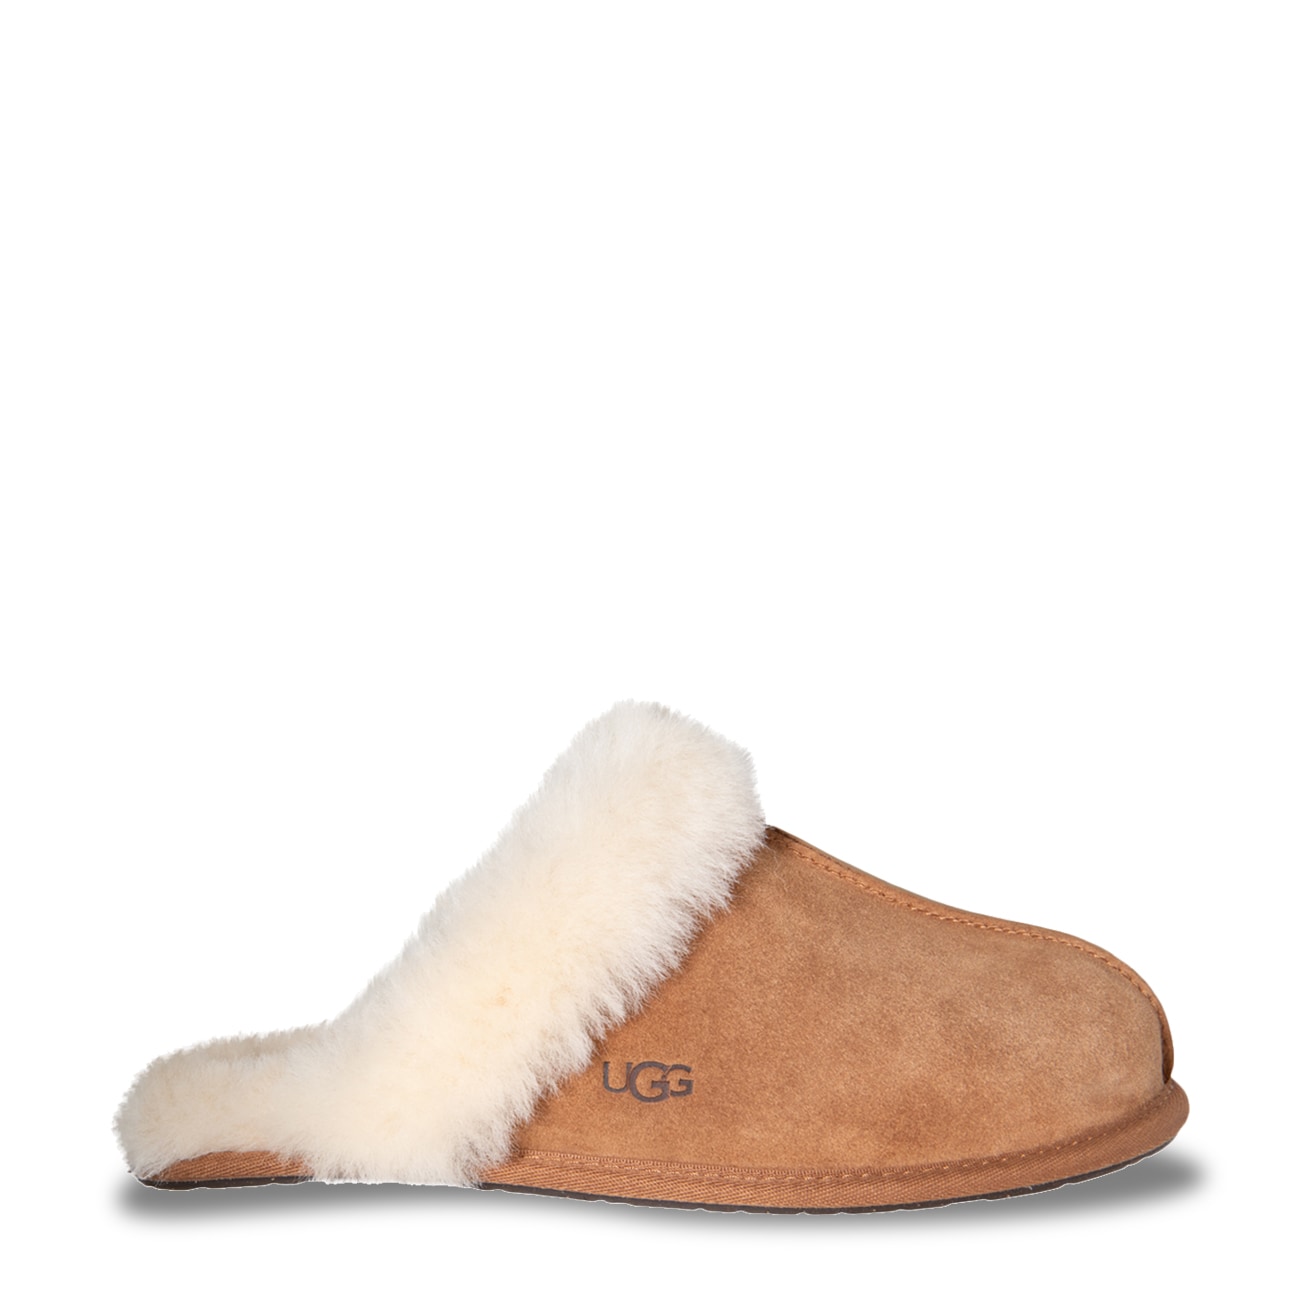 ugg slippers size 4